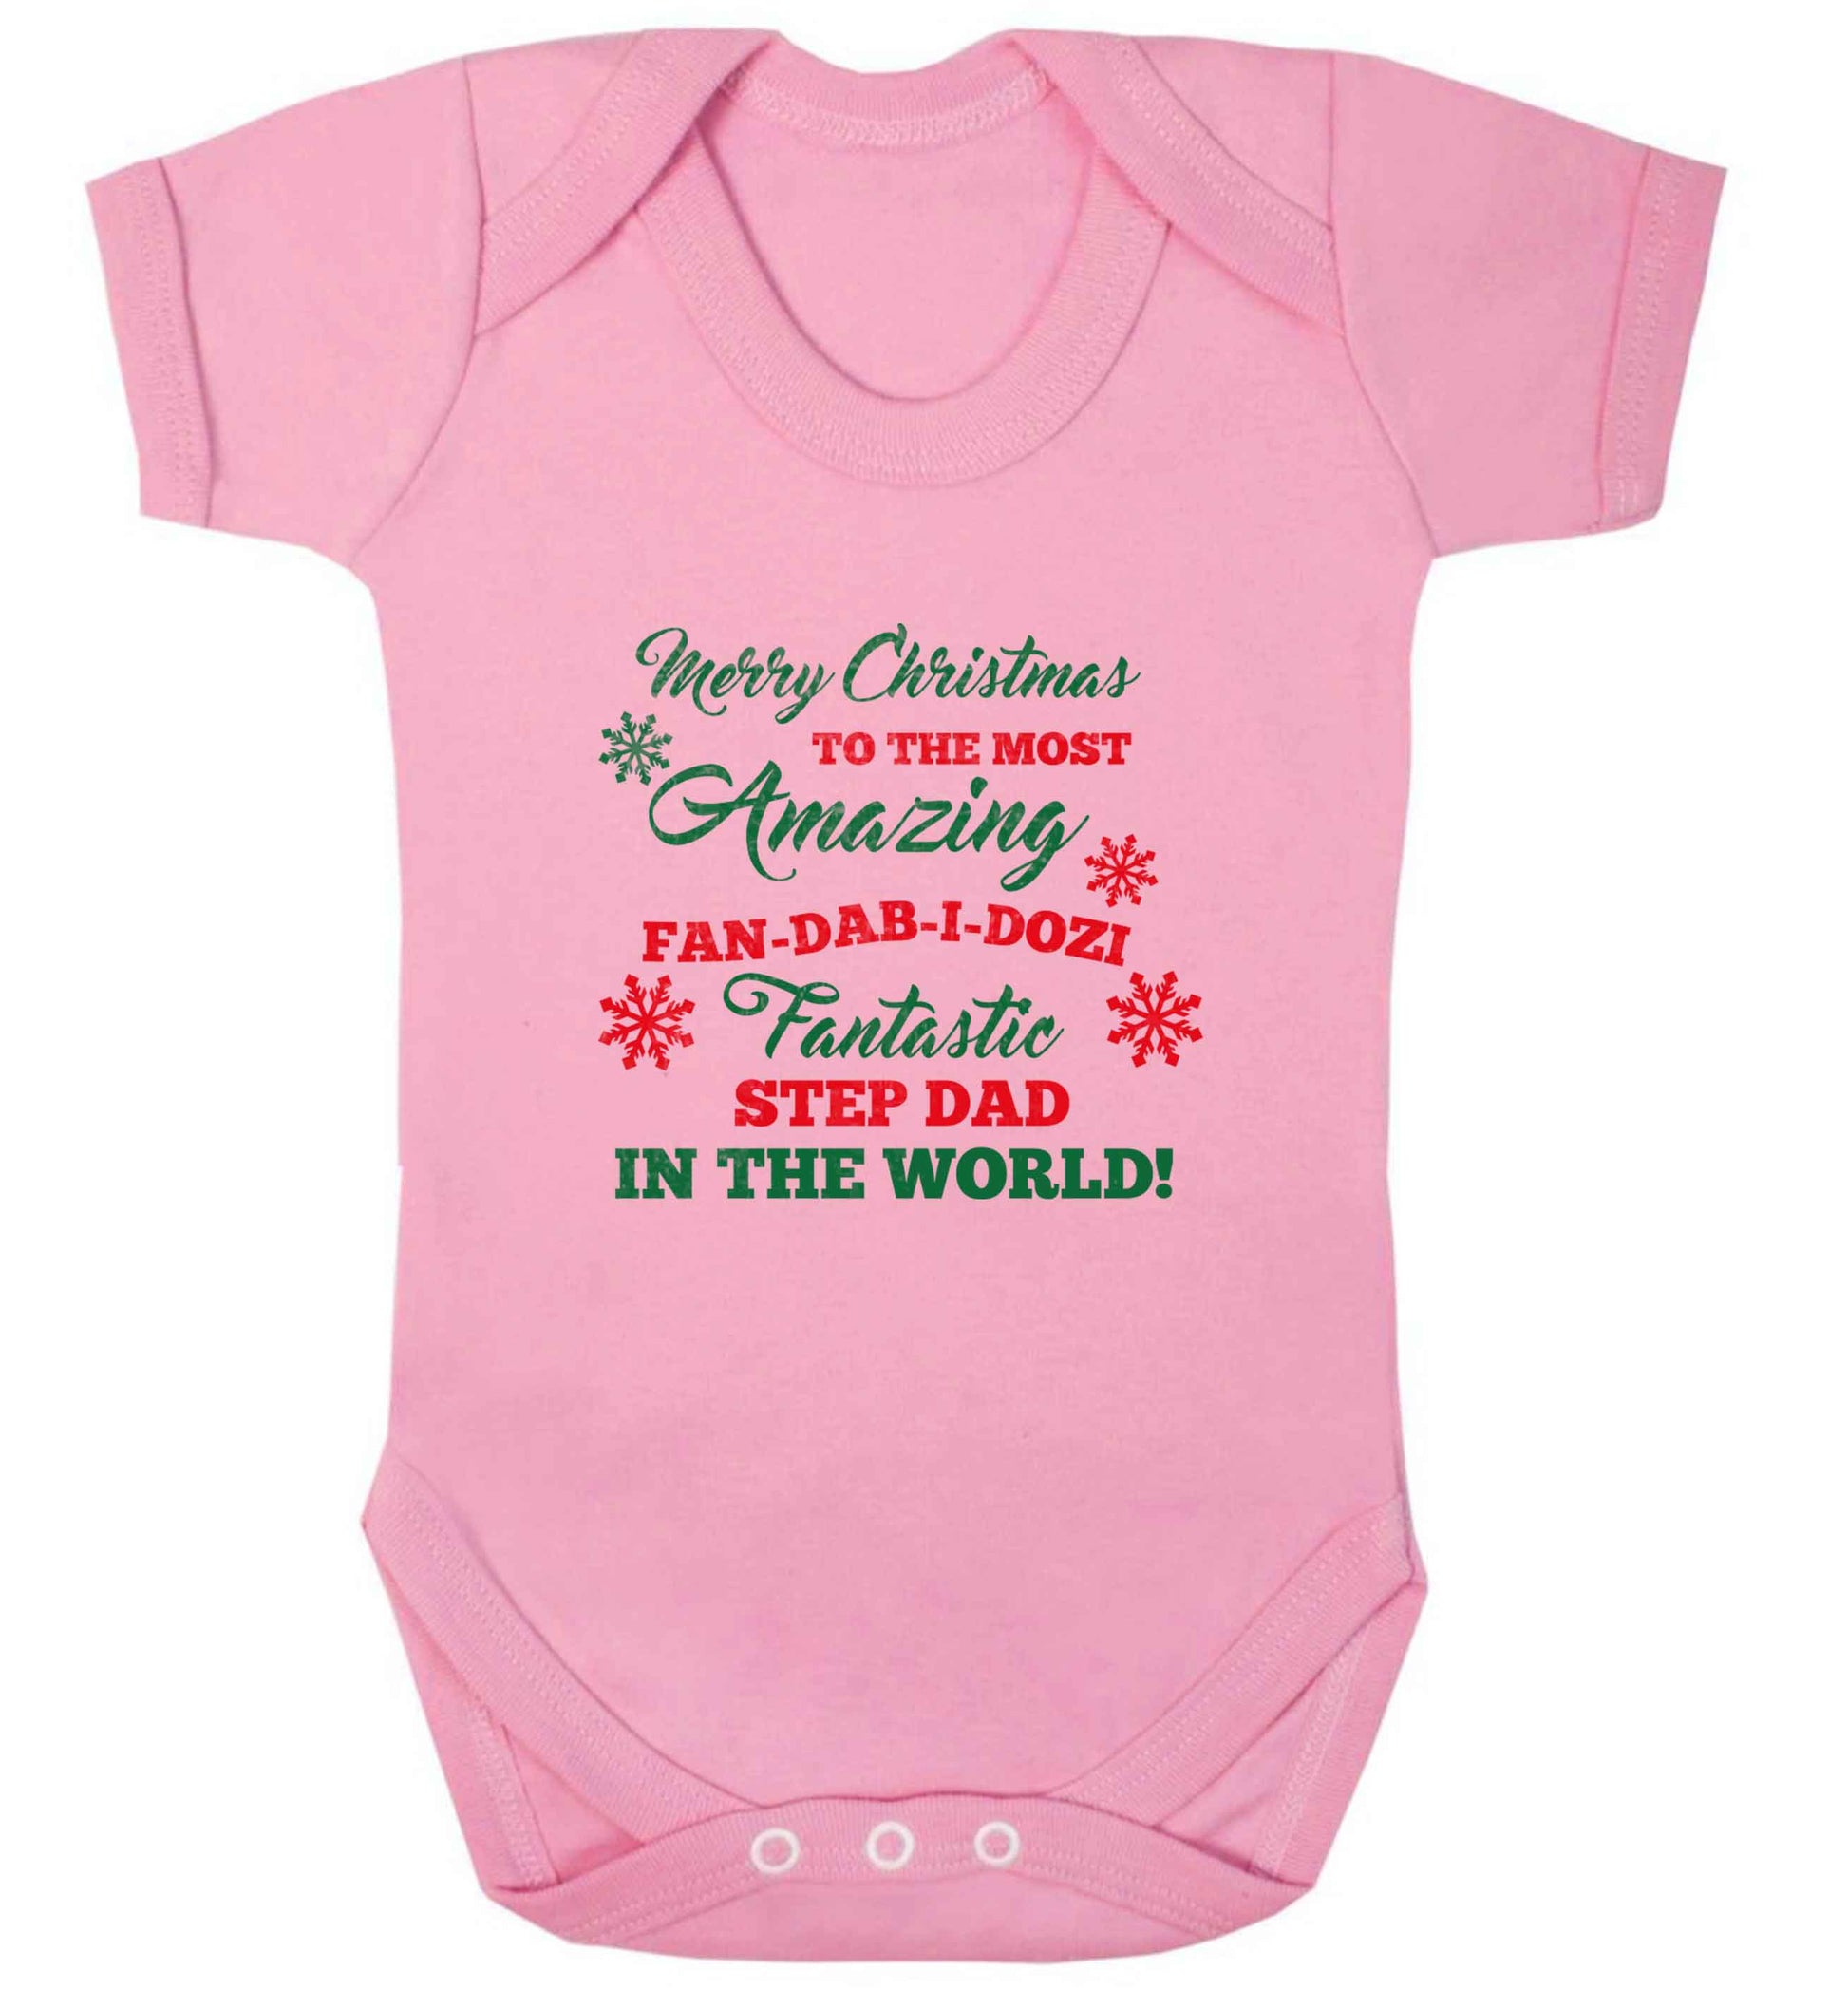 Merry Christmas to the most amazing fan-dab-i-dozi fantasic Step Dad in the world baby vest pale pink 18-24 months